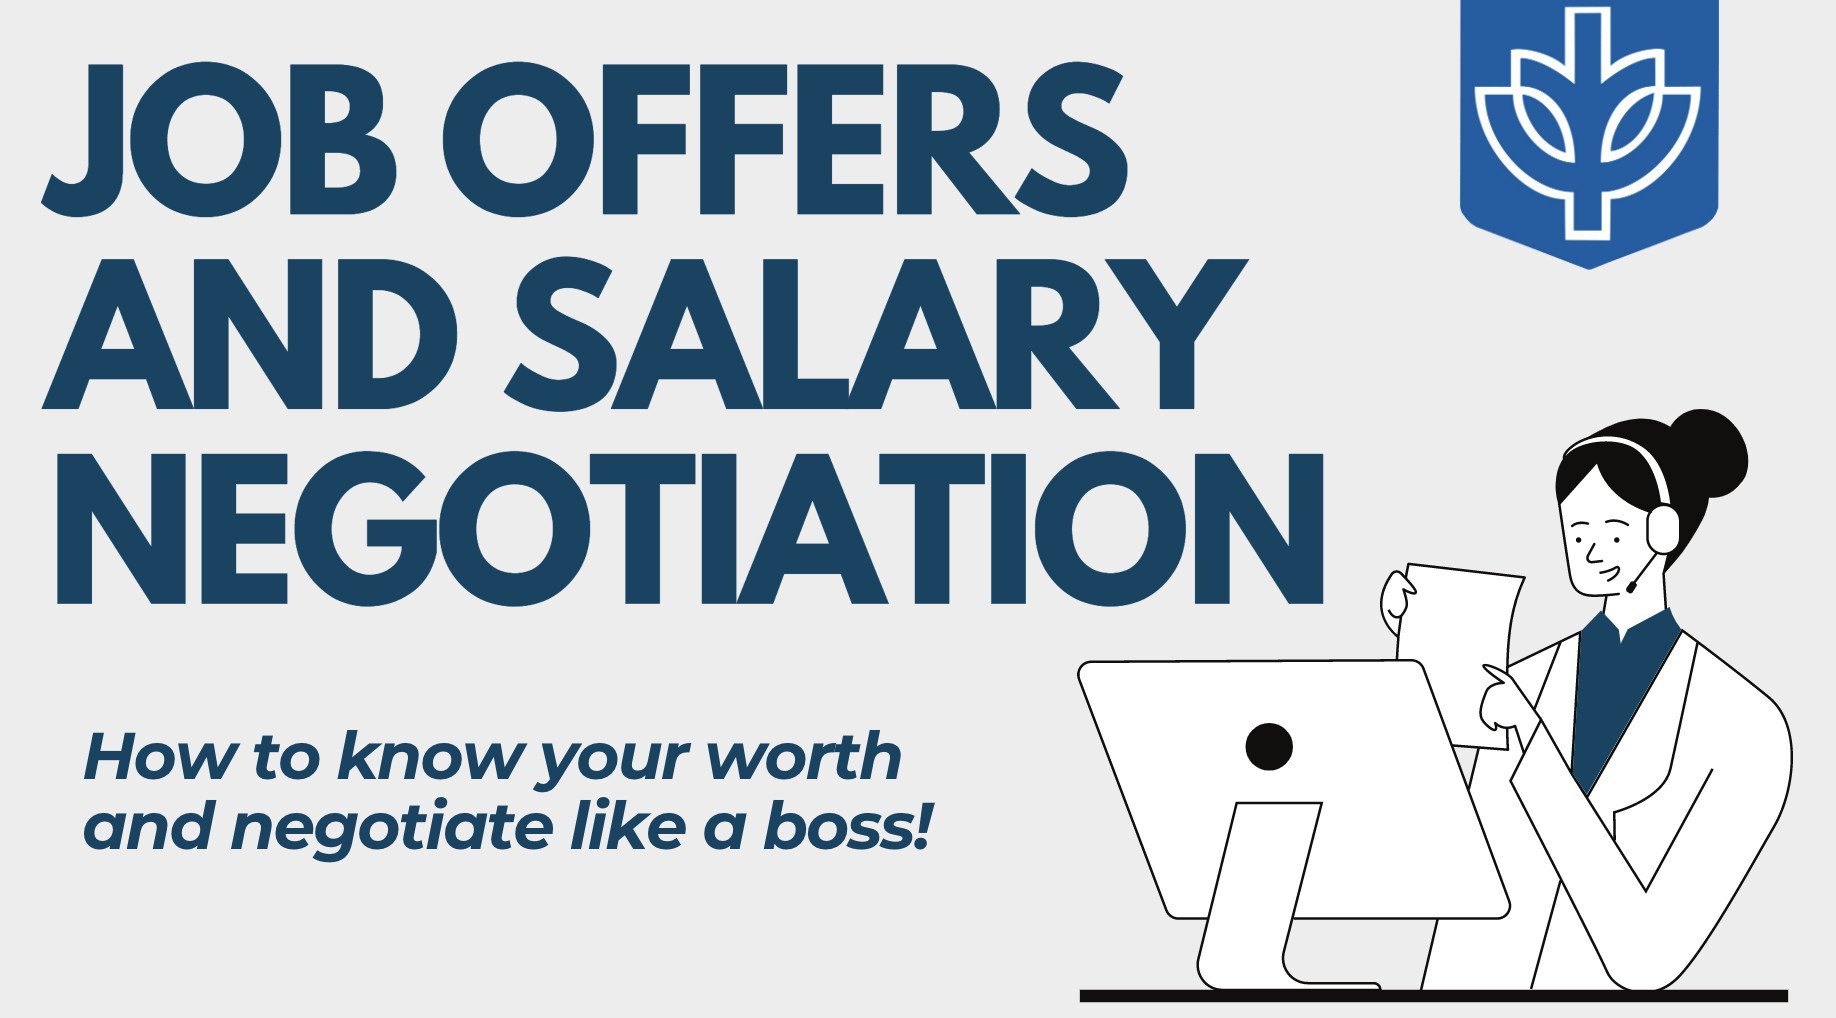 Job Offers and Salary Negotiation